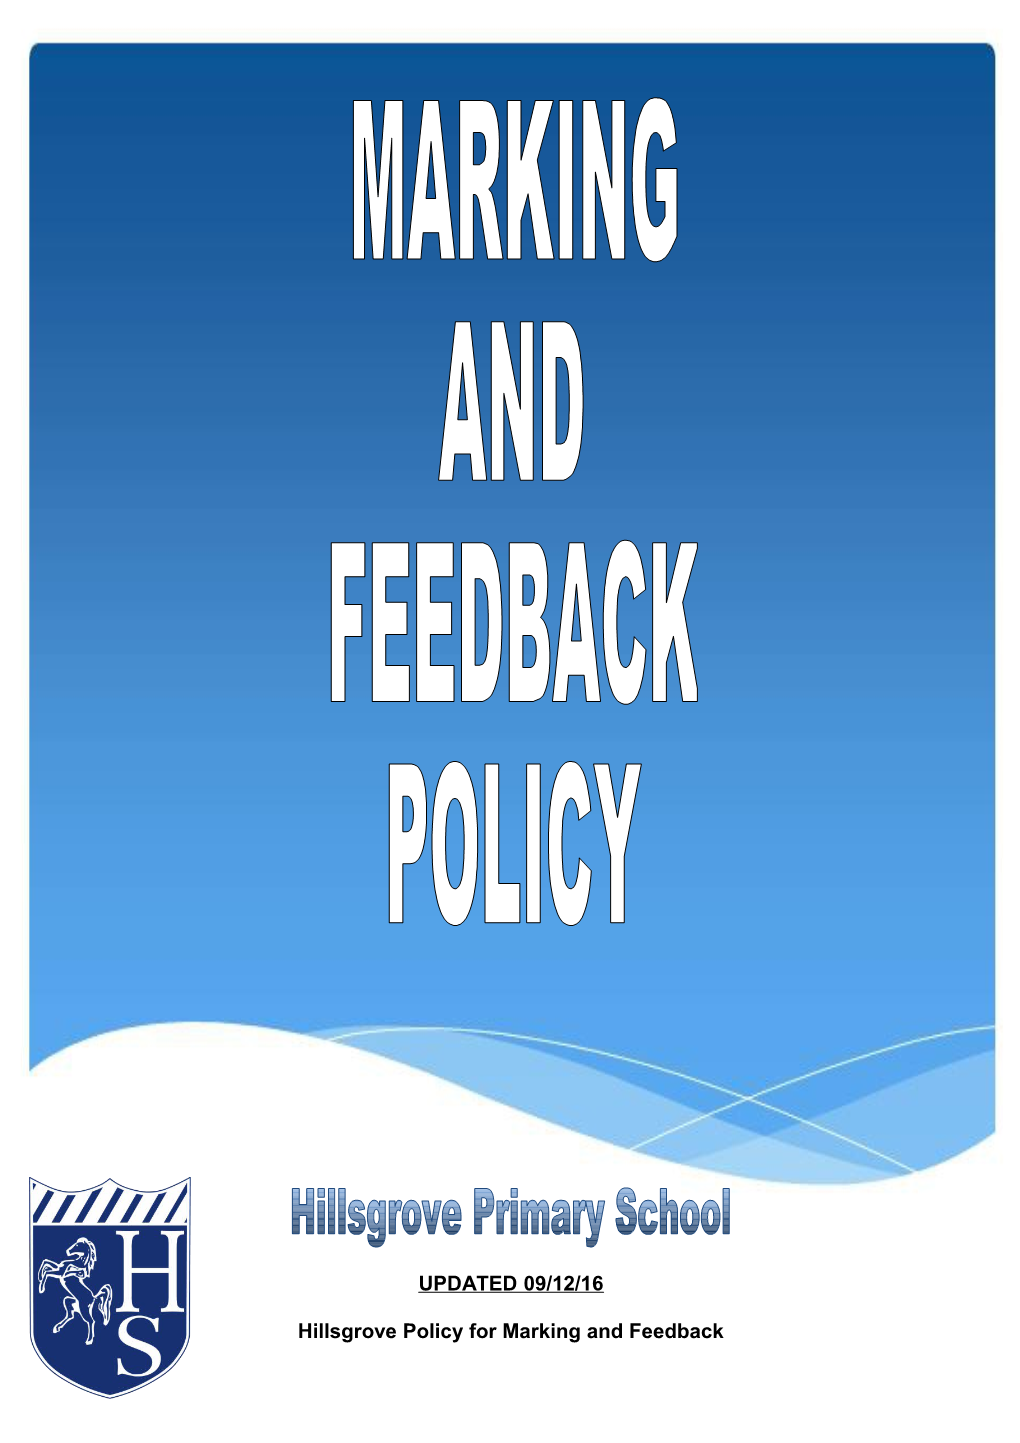 Policy for Marking and Feedback